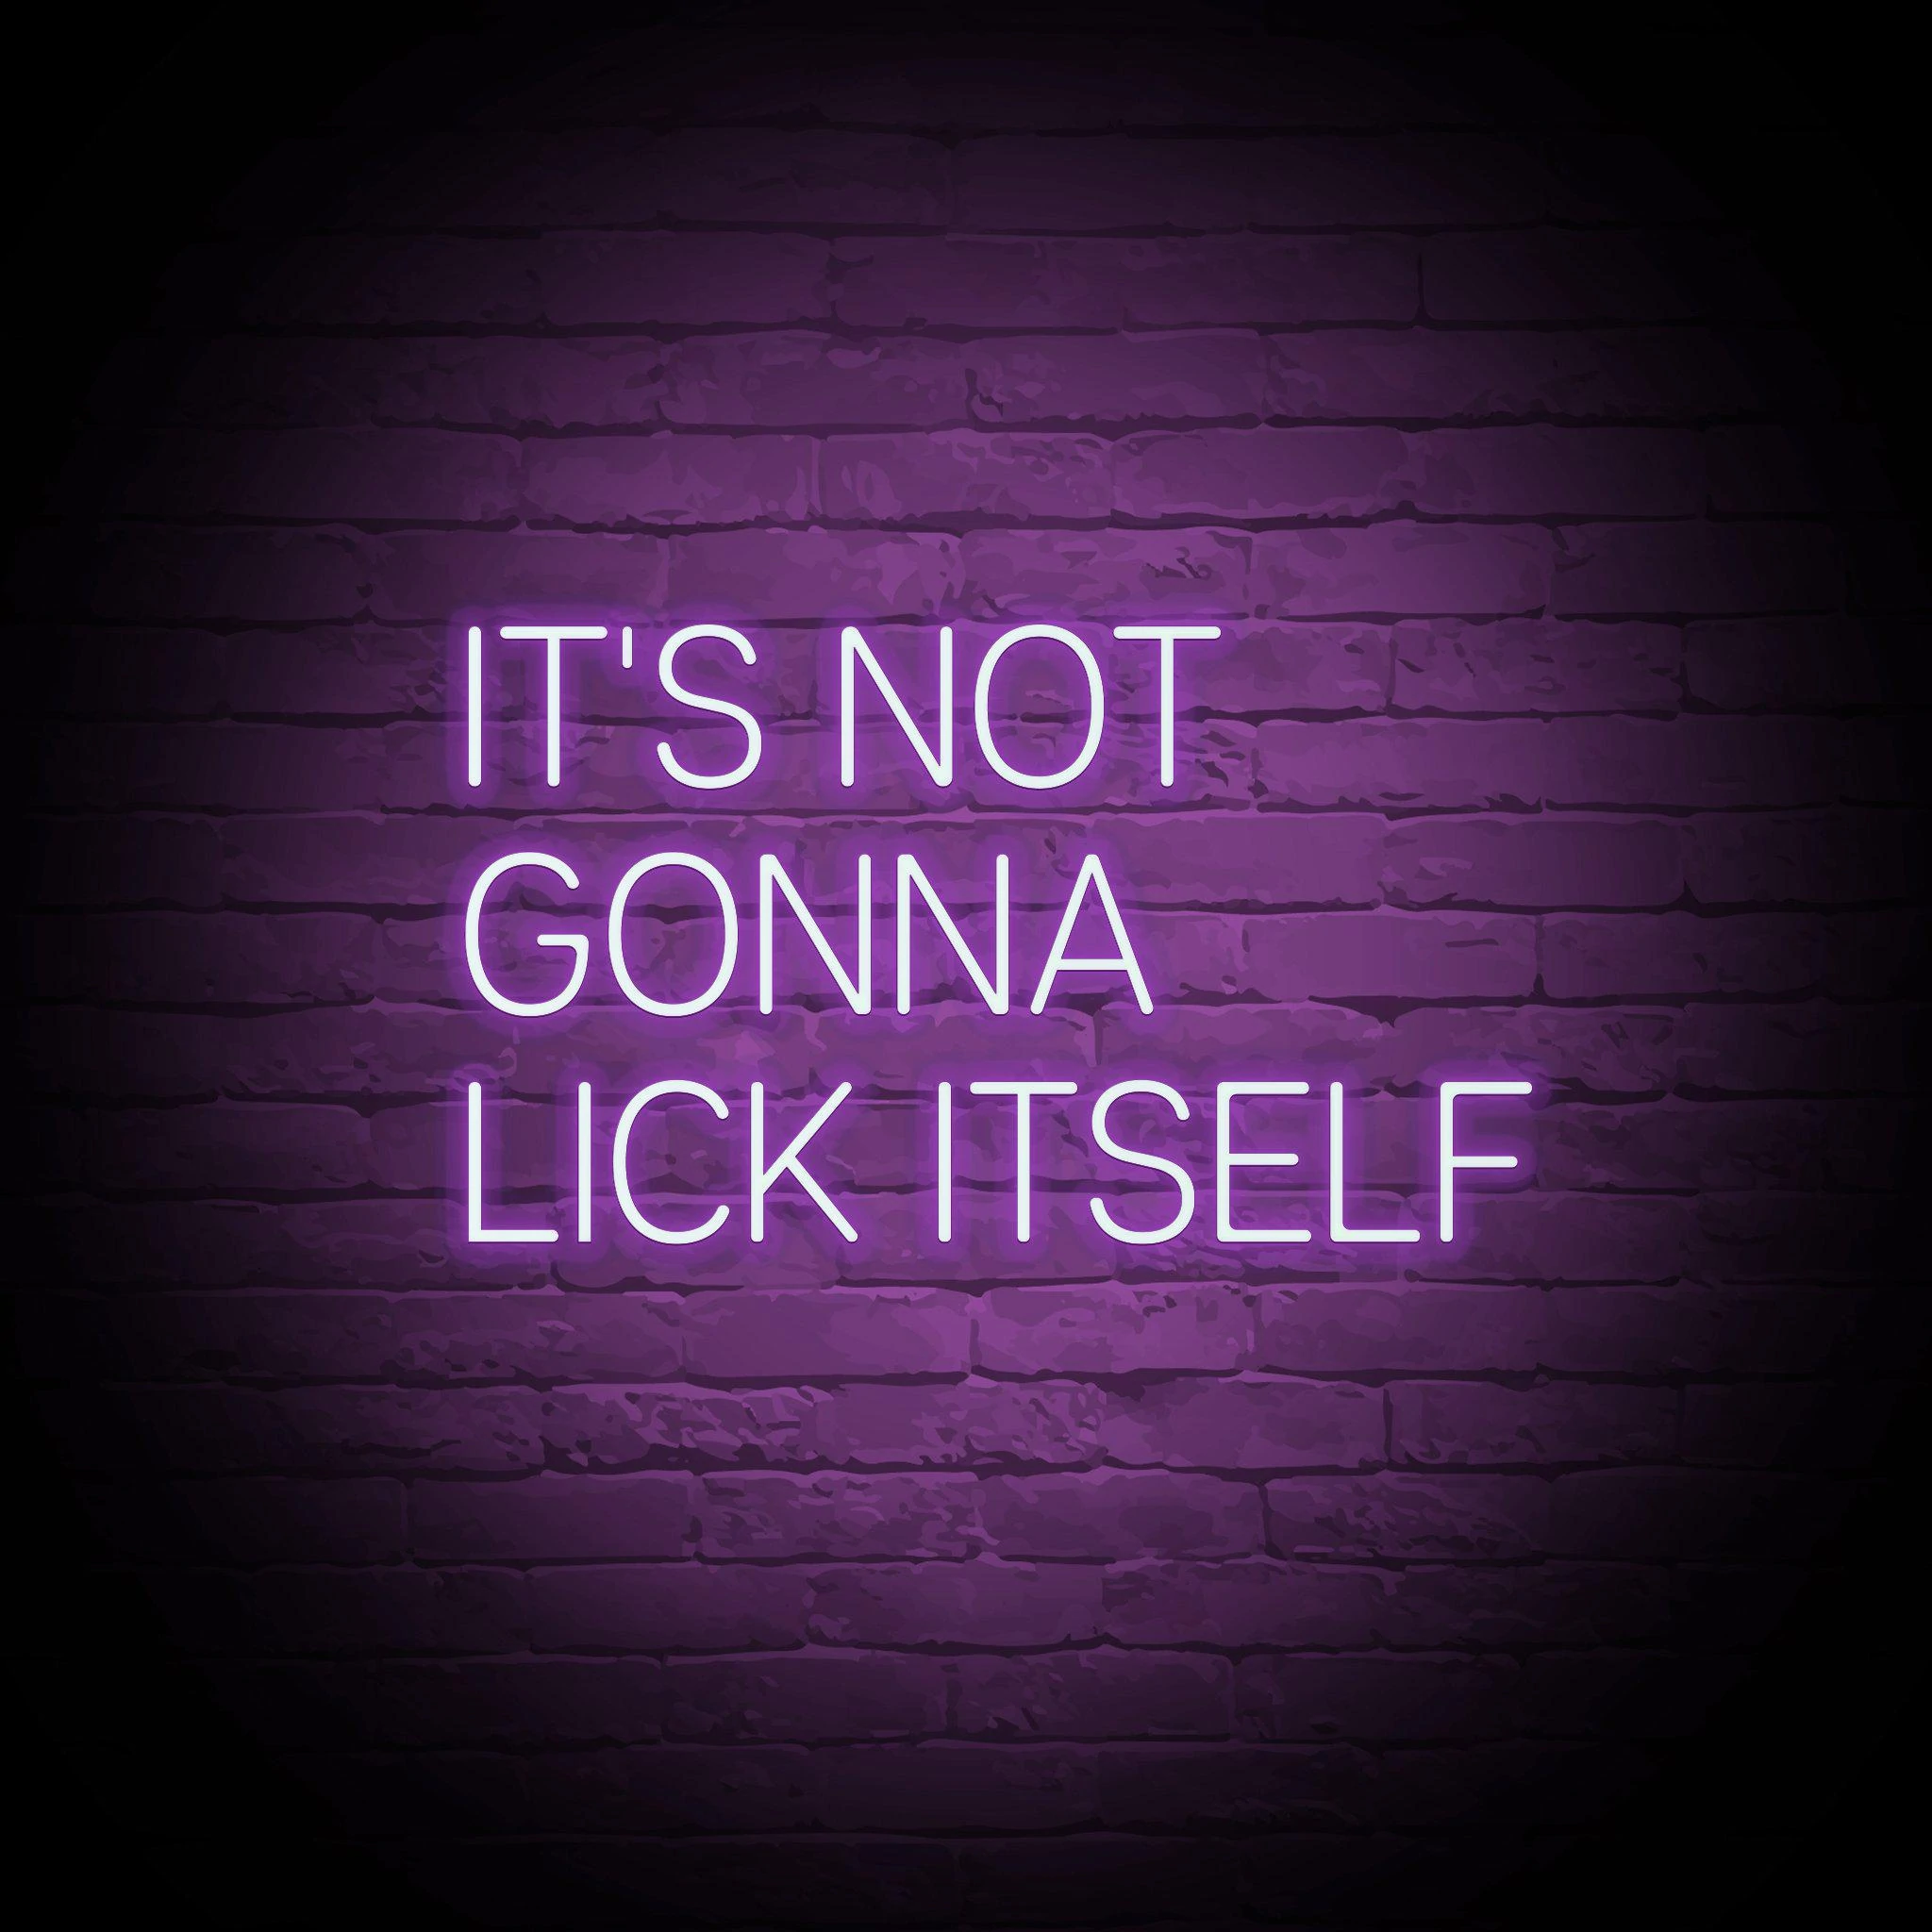 'IT'S NOT GONNA LICK ITSELF' NEON SIGN - NeonFerry